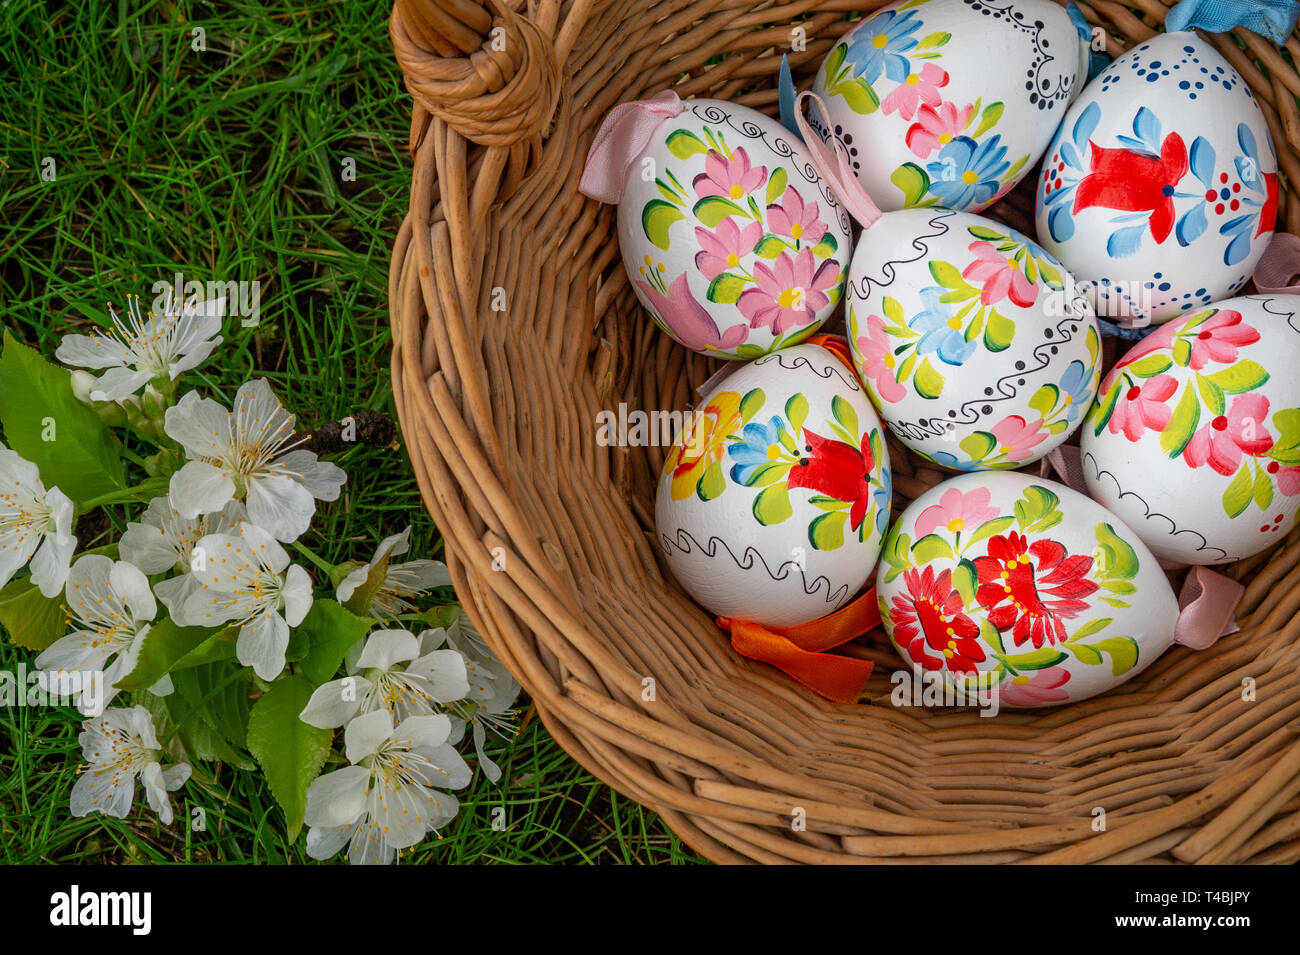 Close up of colorful decorted hand painted Easter eggs in a basket on grass with cherry bossum Stock Photo